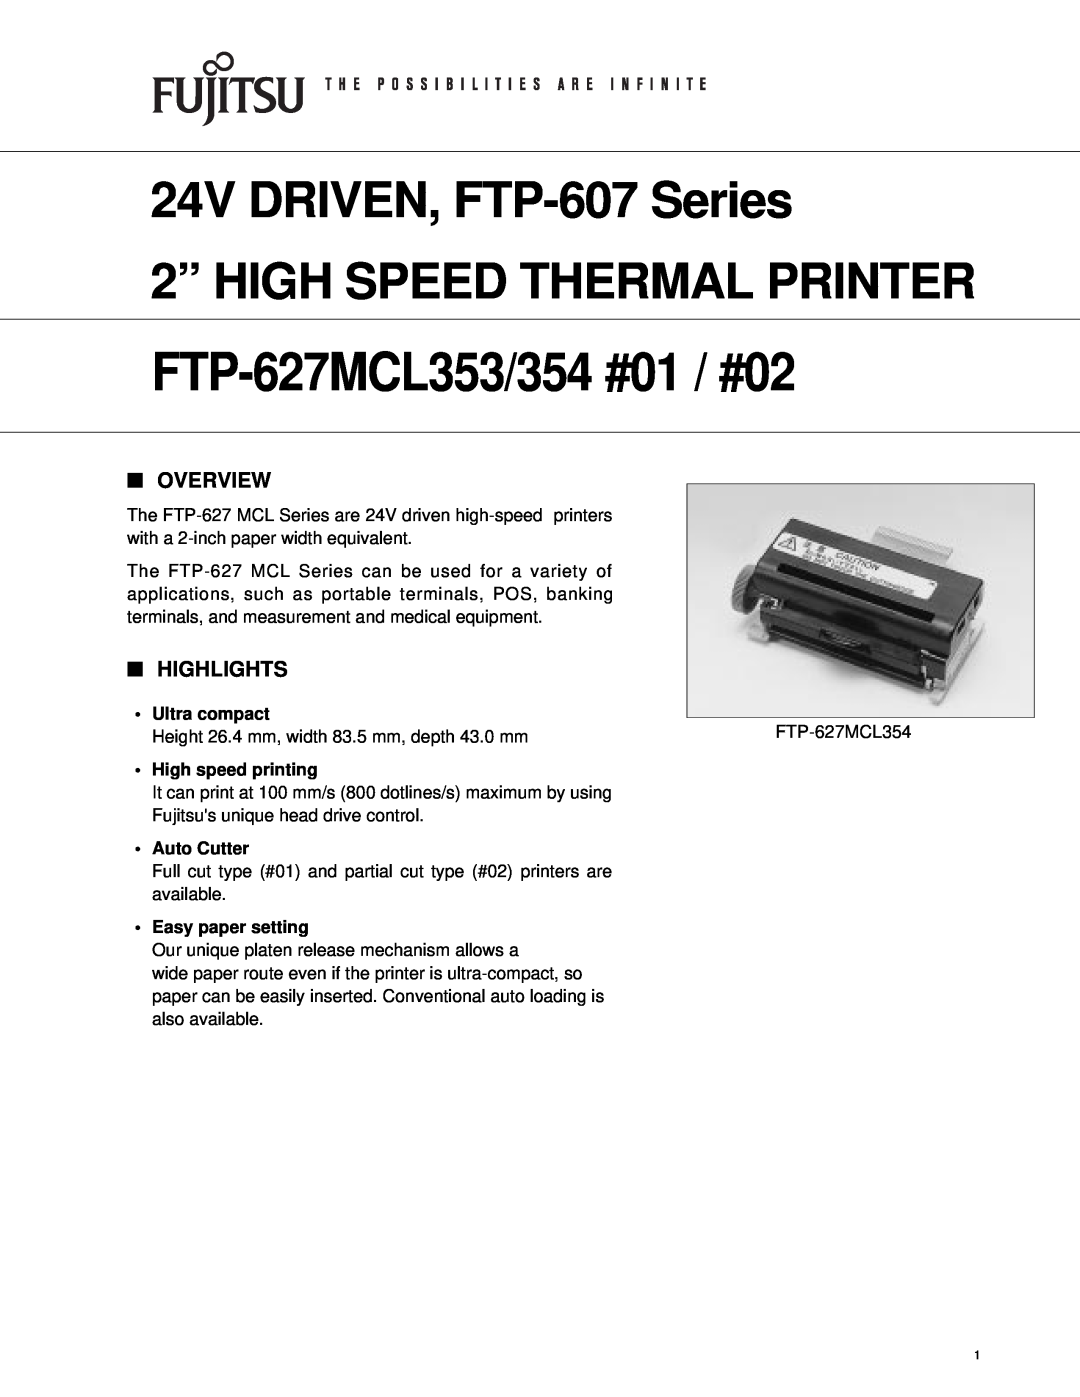 Fujitsu FTP-627MCL353 manual Overview, Highlights, Ultra compact, High speed printing, Auto Cutter, Easy paper setting 